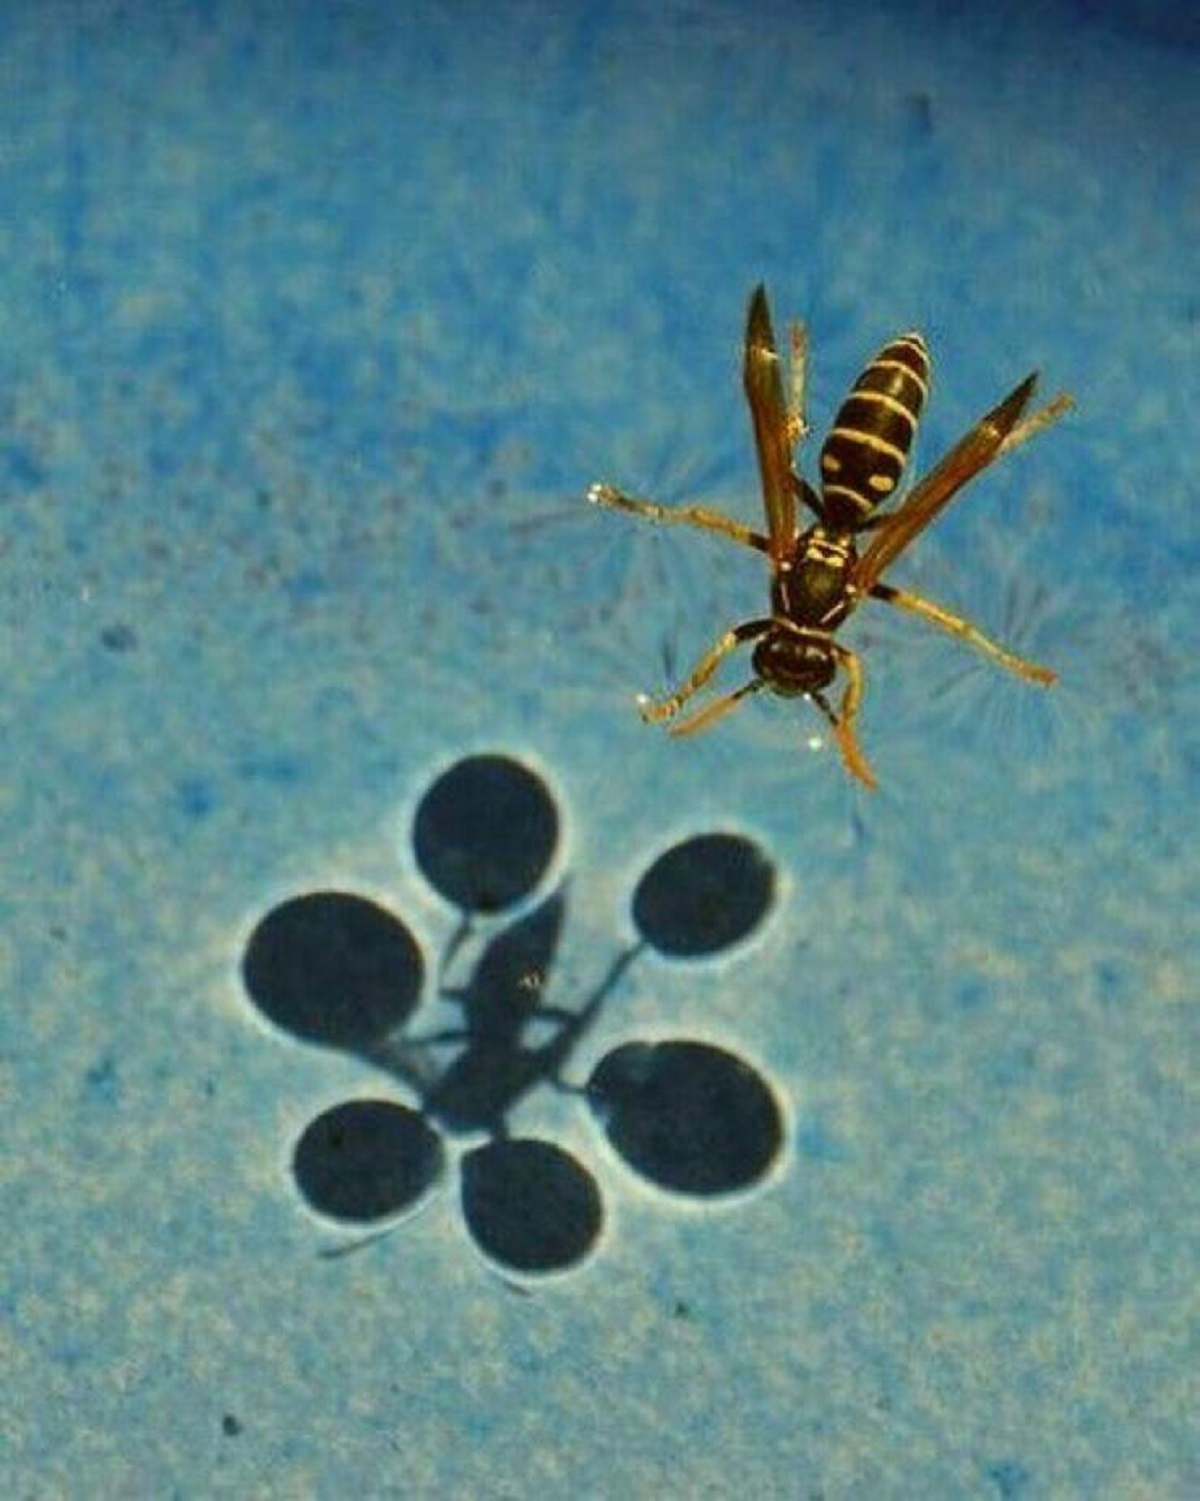 "A Perfect Demonstration Of How The Wasp Is Using The Surface Water Tension Making The Shadow Look Like Circles And How Large Each Area Is That Is Holding Up Each Leg"